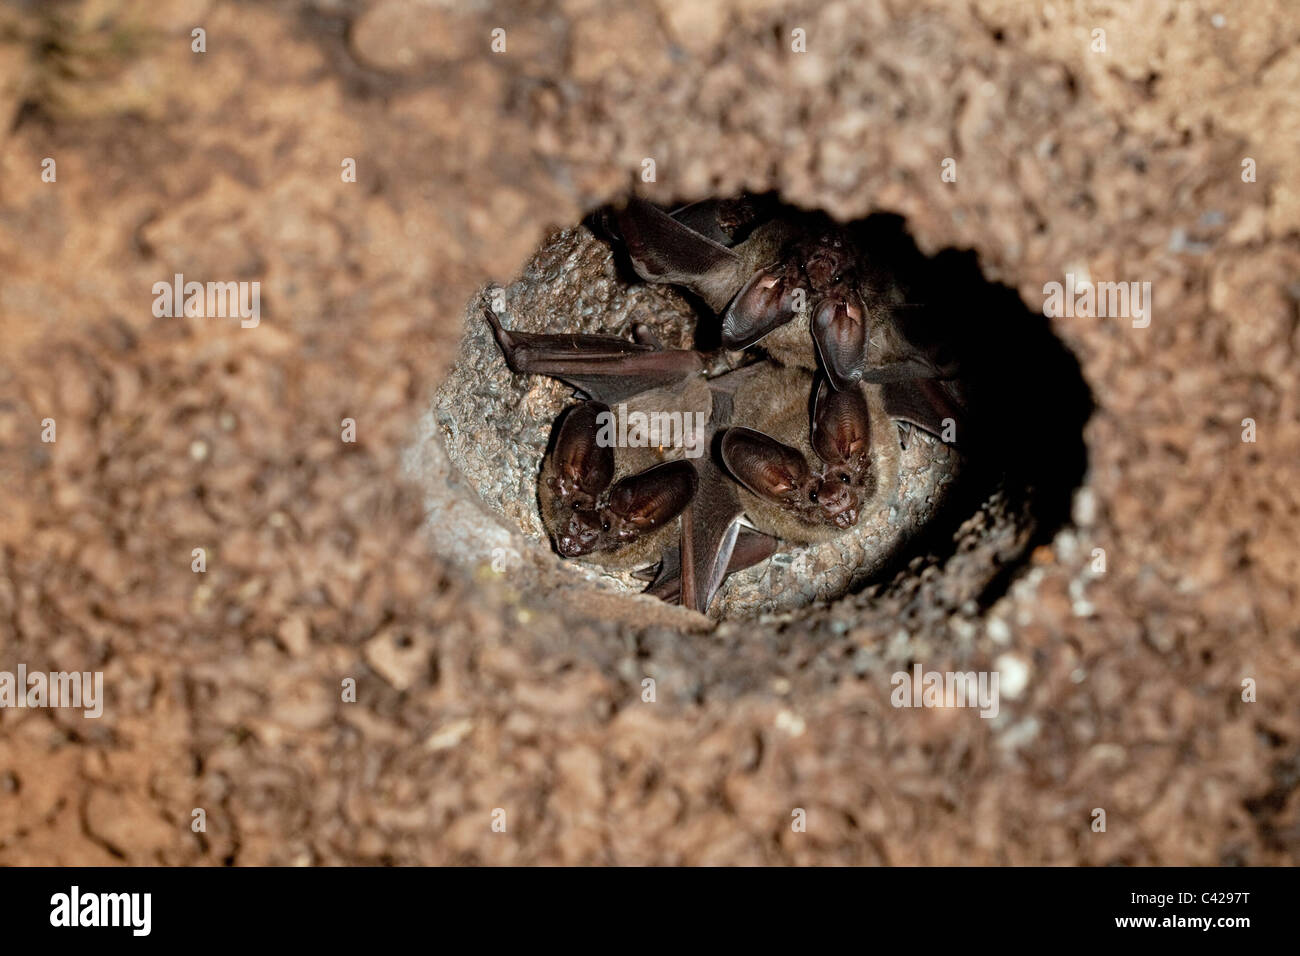 Peru, Boca Manu, Blanquillo, Manu National Park, 3 young bats in nest, situated in former termite nest. Stock Photo